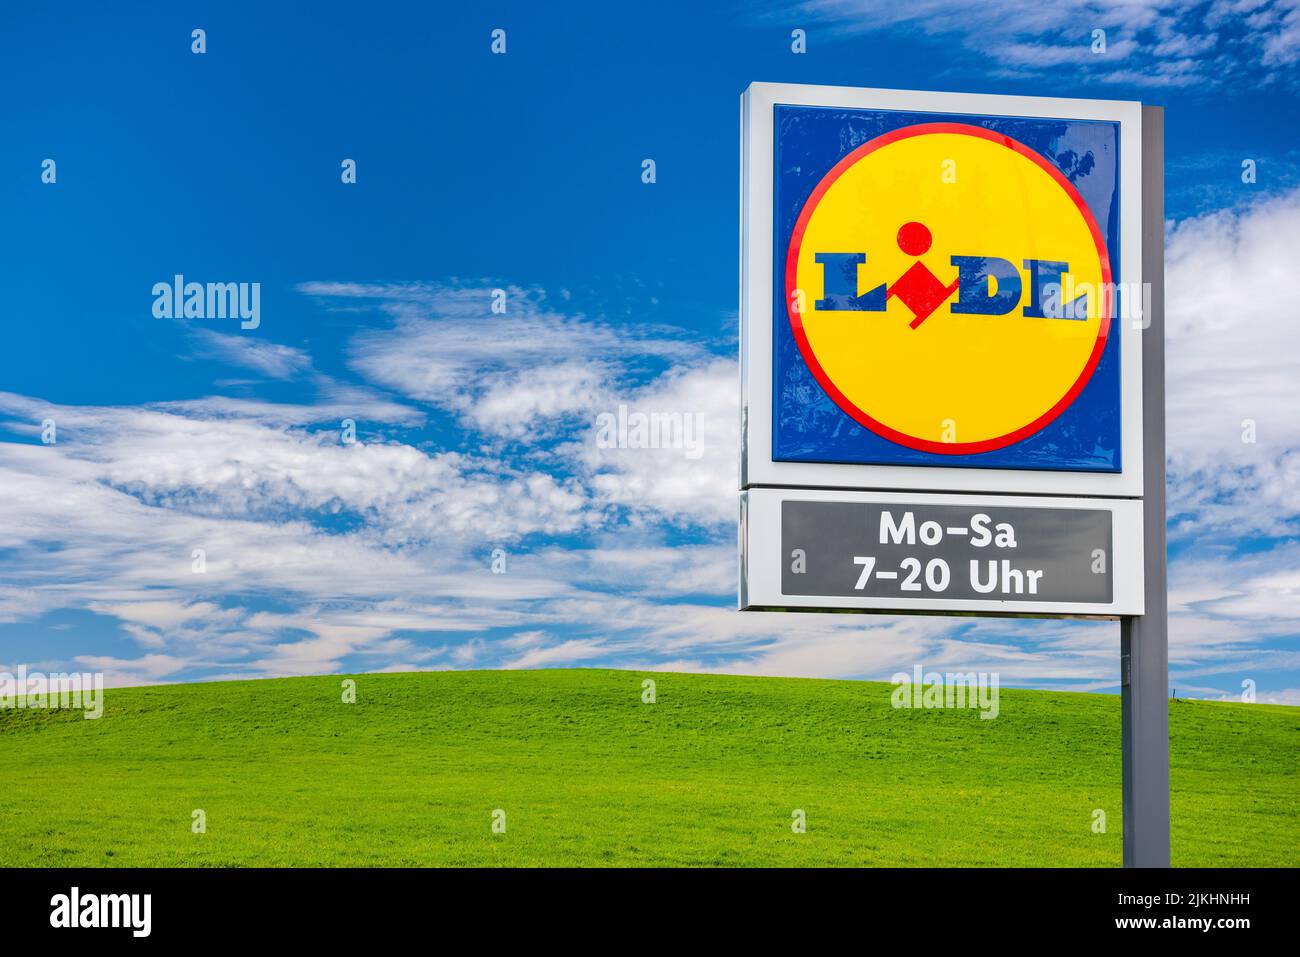 Company sign and logo of the discounter Lidl Stock Photo